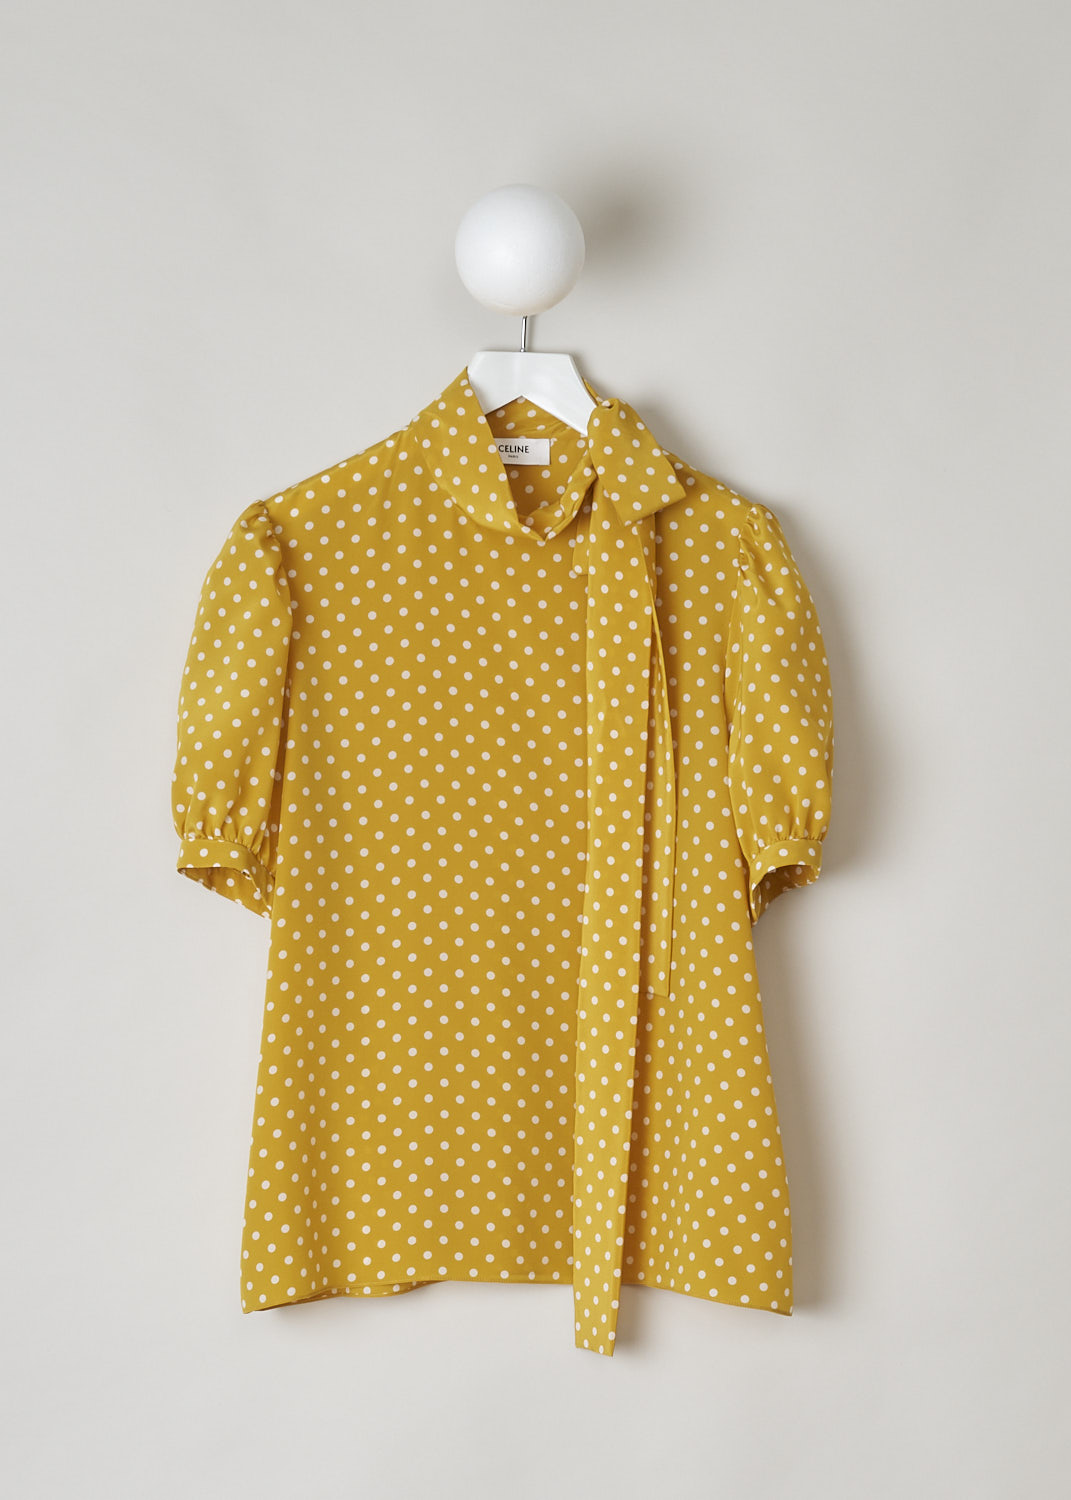 CELINE, MUSTARD YELLOW POLKA DOT TOP WITH PUSSY BOW, 966H_2B606_11TC, Yellow, Print, Front, This mustard yellow top has a white polka dot print. The top has a high neck with a pussy bow to one side. The top has short puff sleeves. The closure option is a concealed zipper on the left shoulder.   
